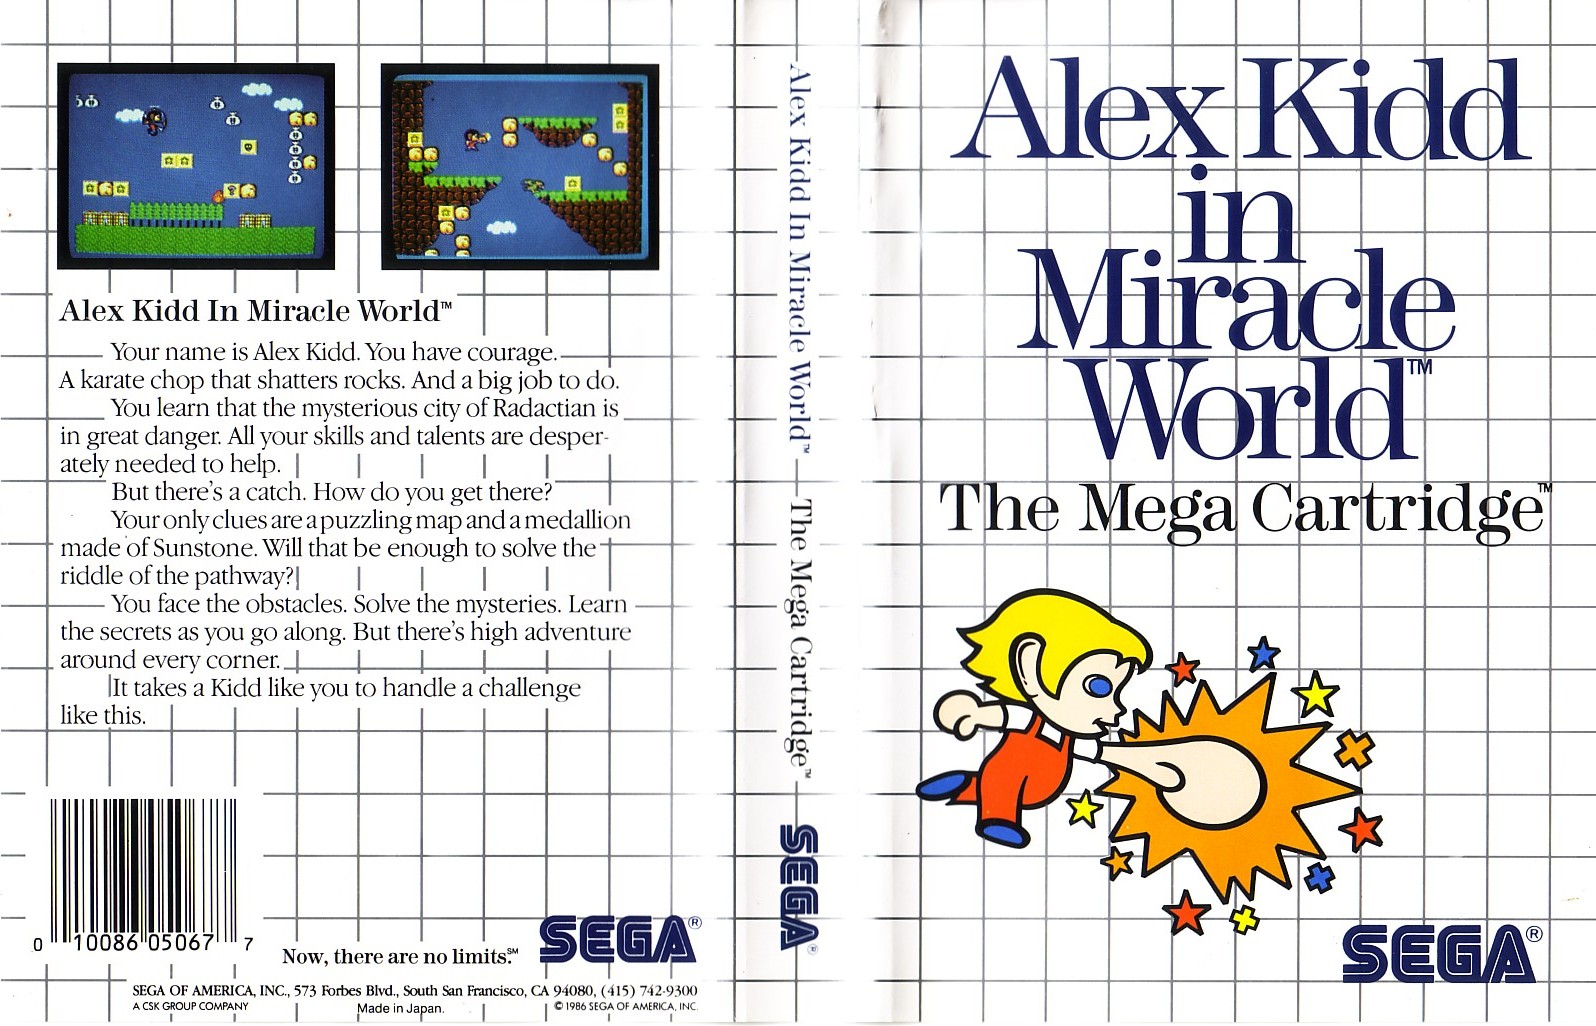 Alex Kidd In Miracle World Backgrounds, Compatible - PC, Mobile, Gadgets| 1596x1026 px